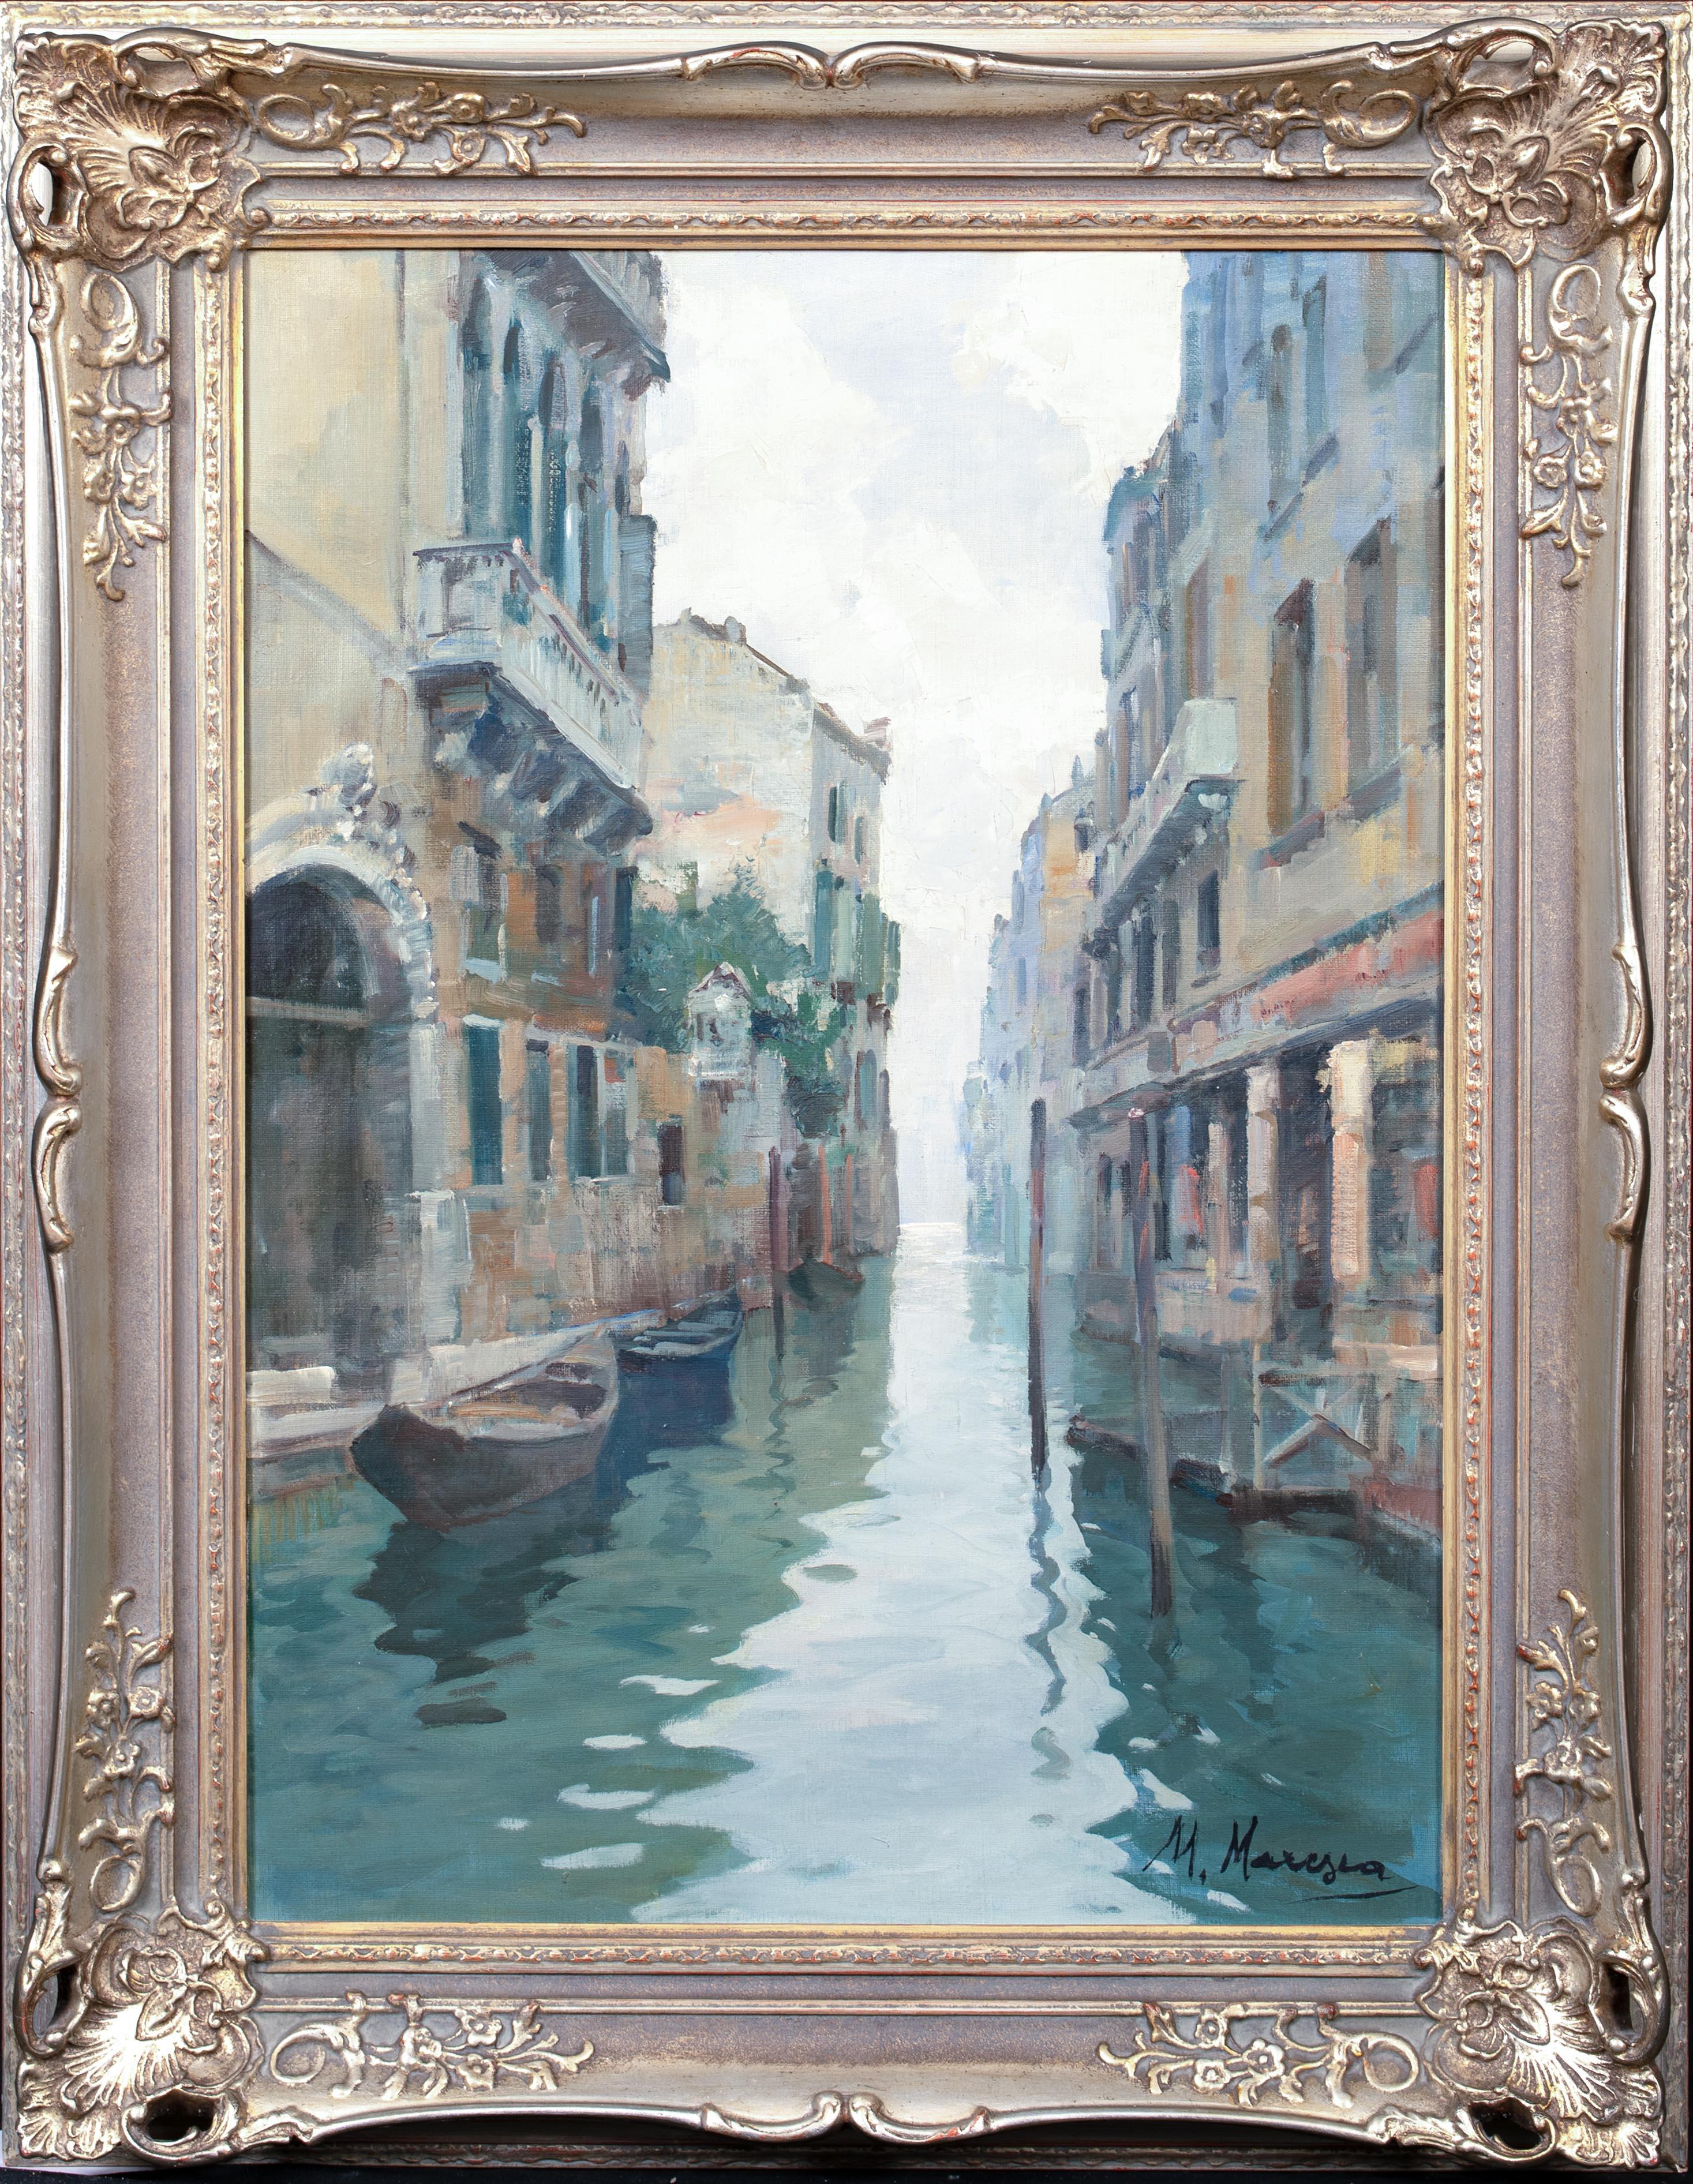 Unknown Landscape Painting - A Venice Backwater Canal, early 20th Century  by MARIO MARESCA (1877-c.1959)